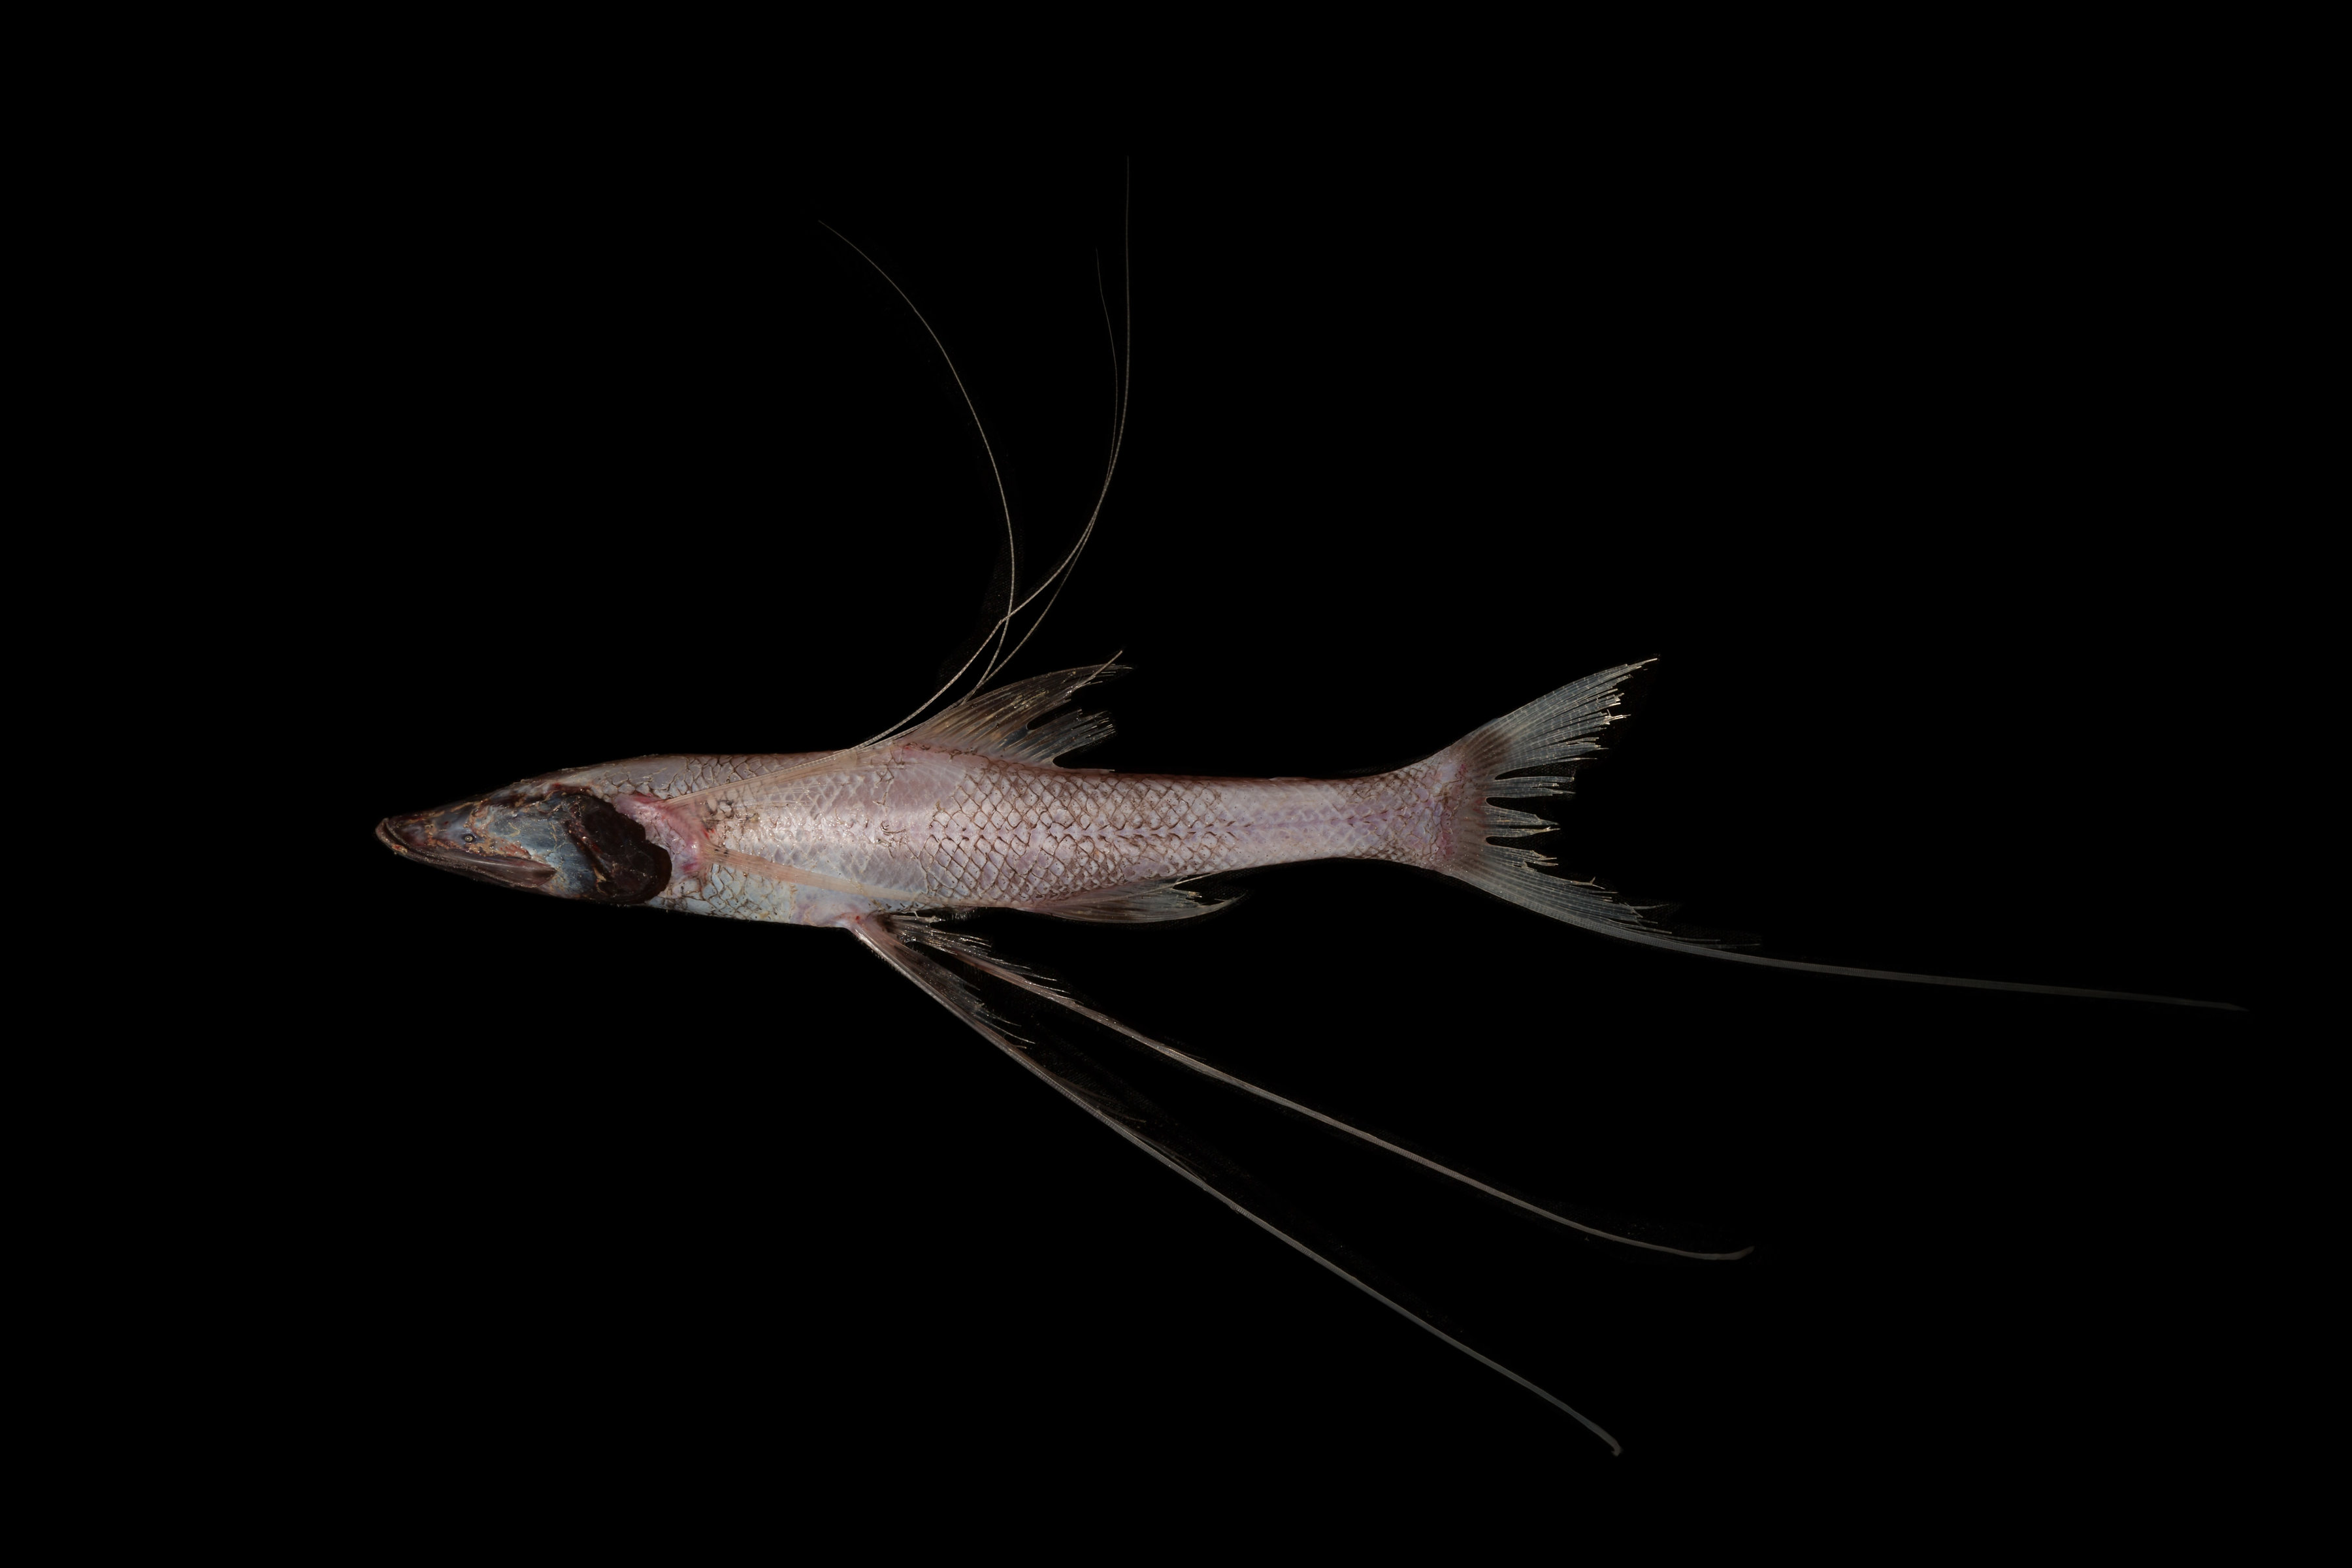 Long and thin, pale pink coloured fish with thin fins as long as its body.